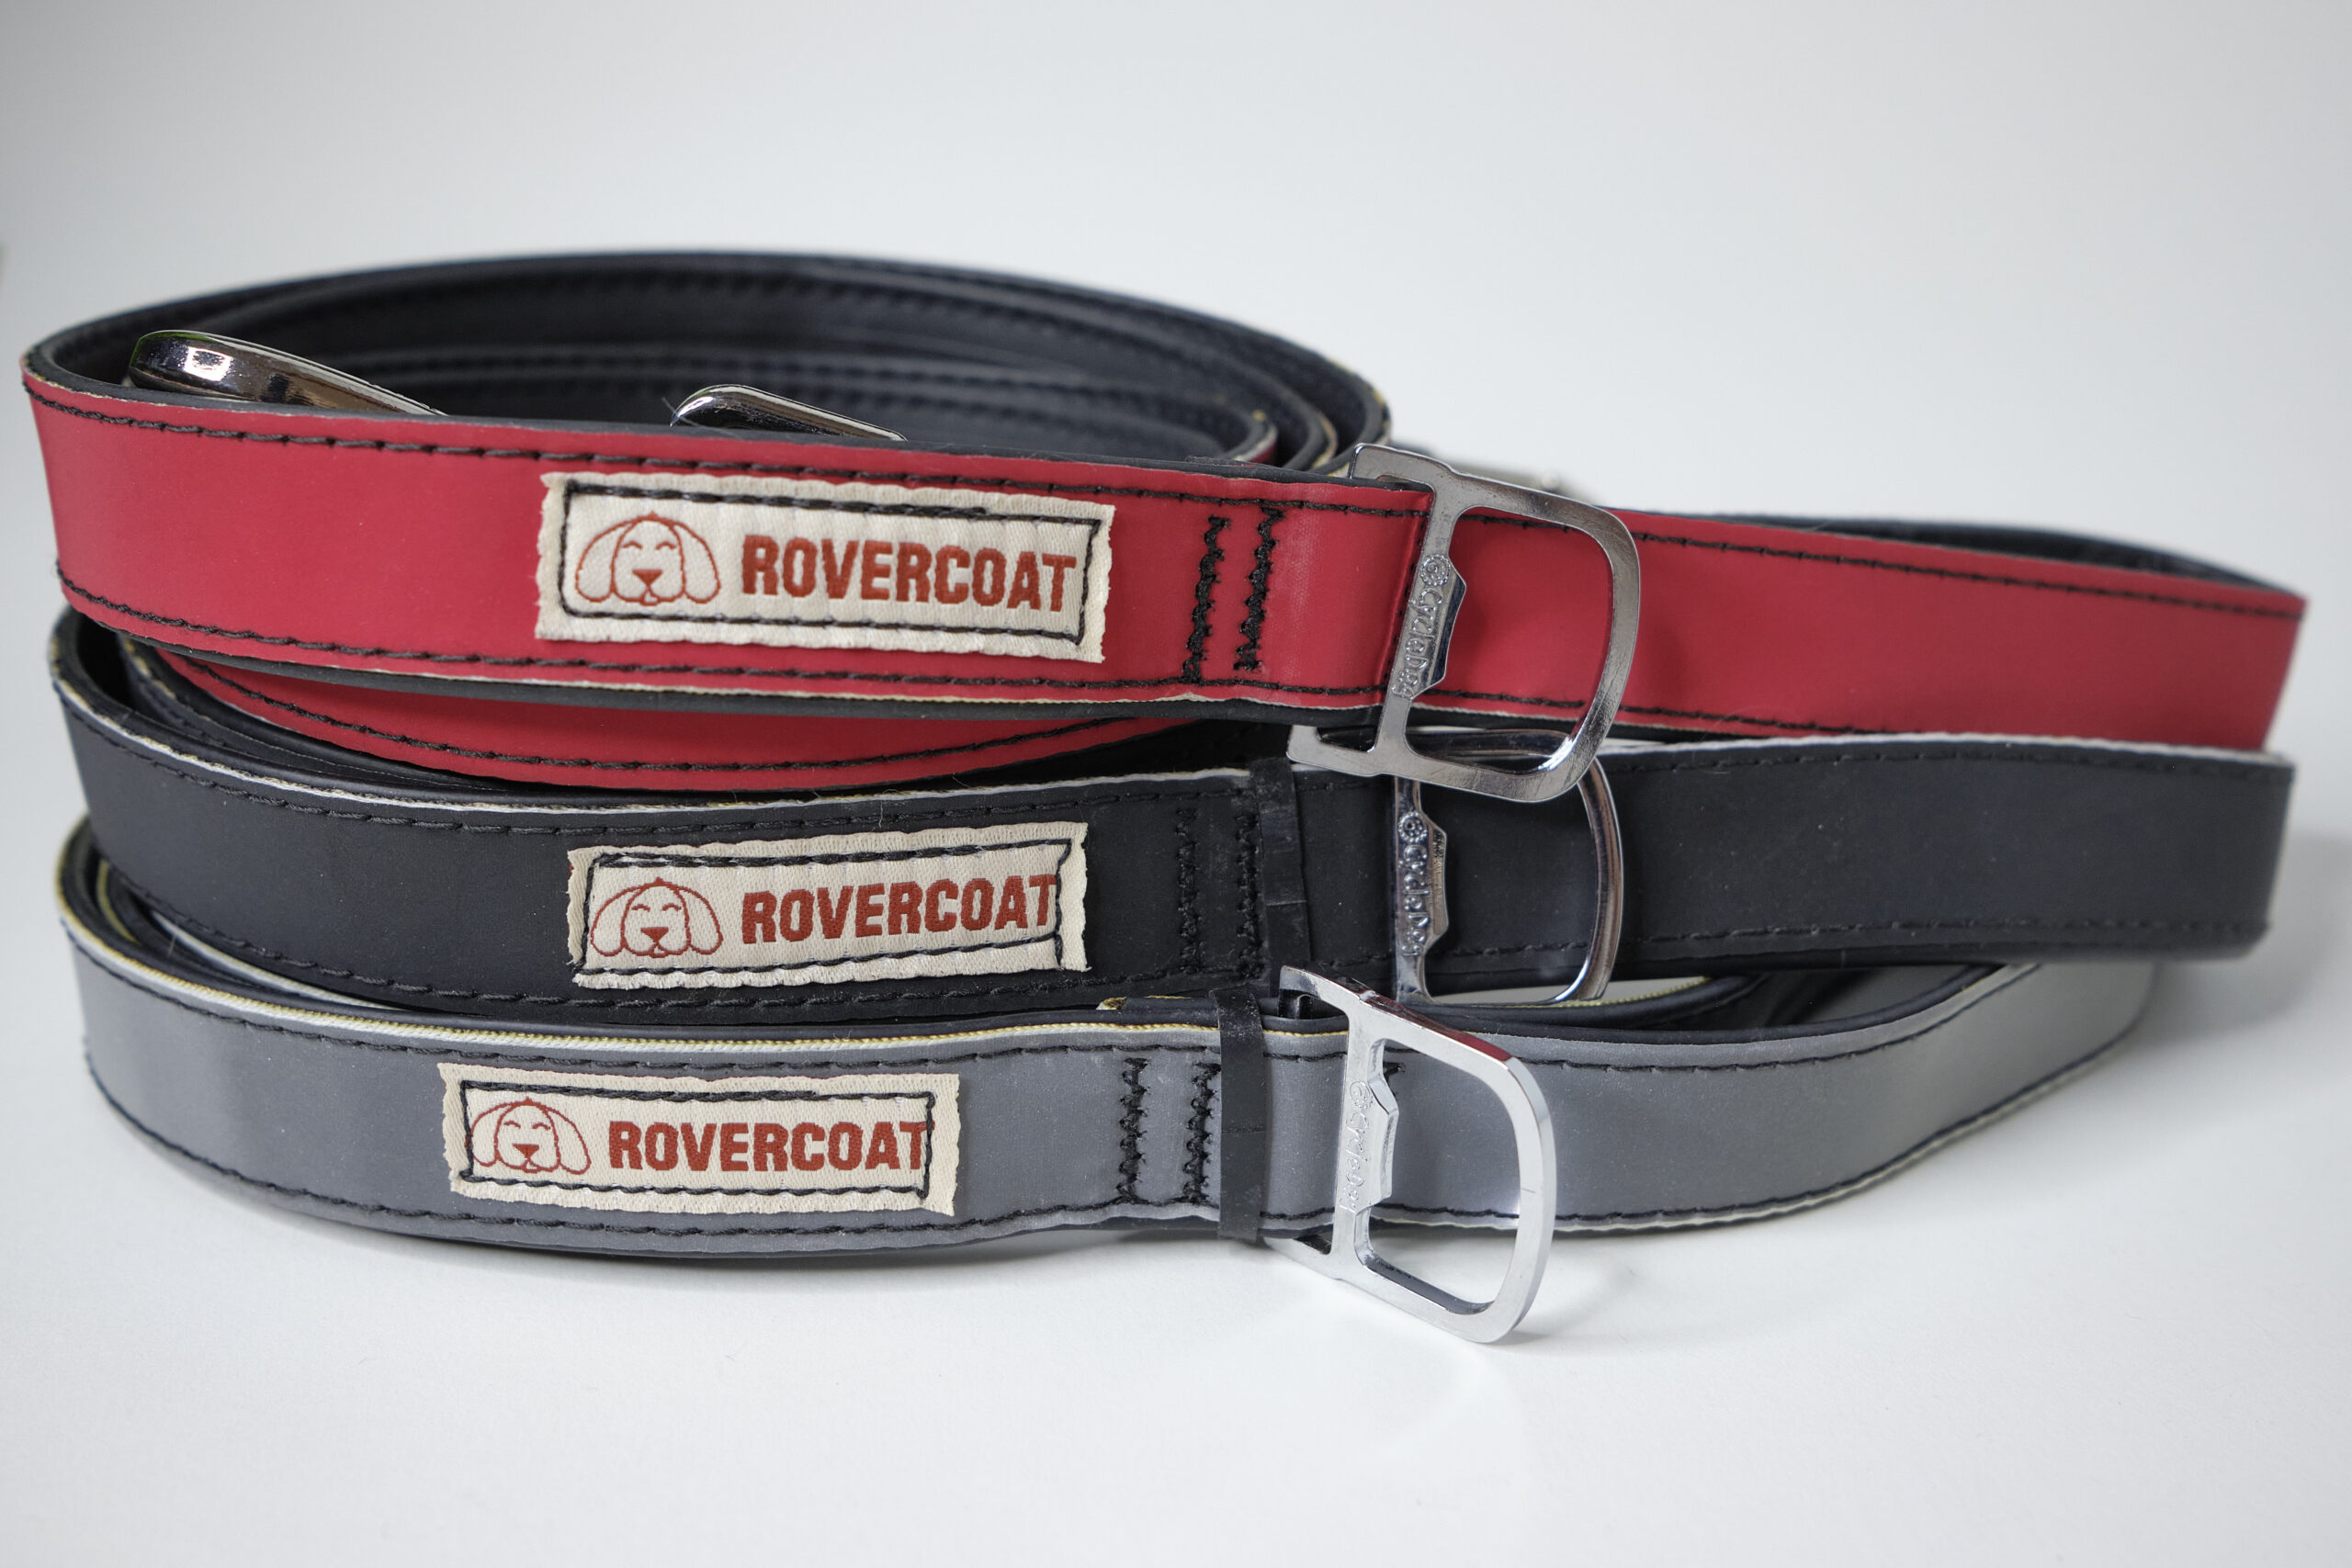 Rovercoat Leashes - Red, Black, Silver